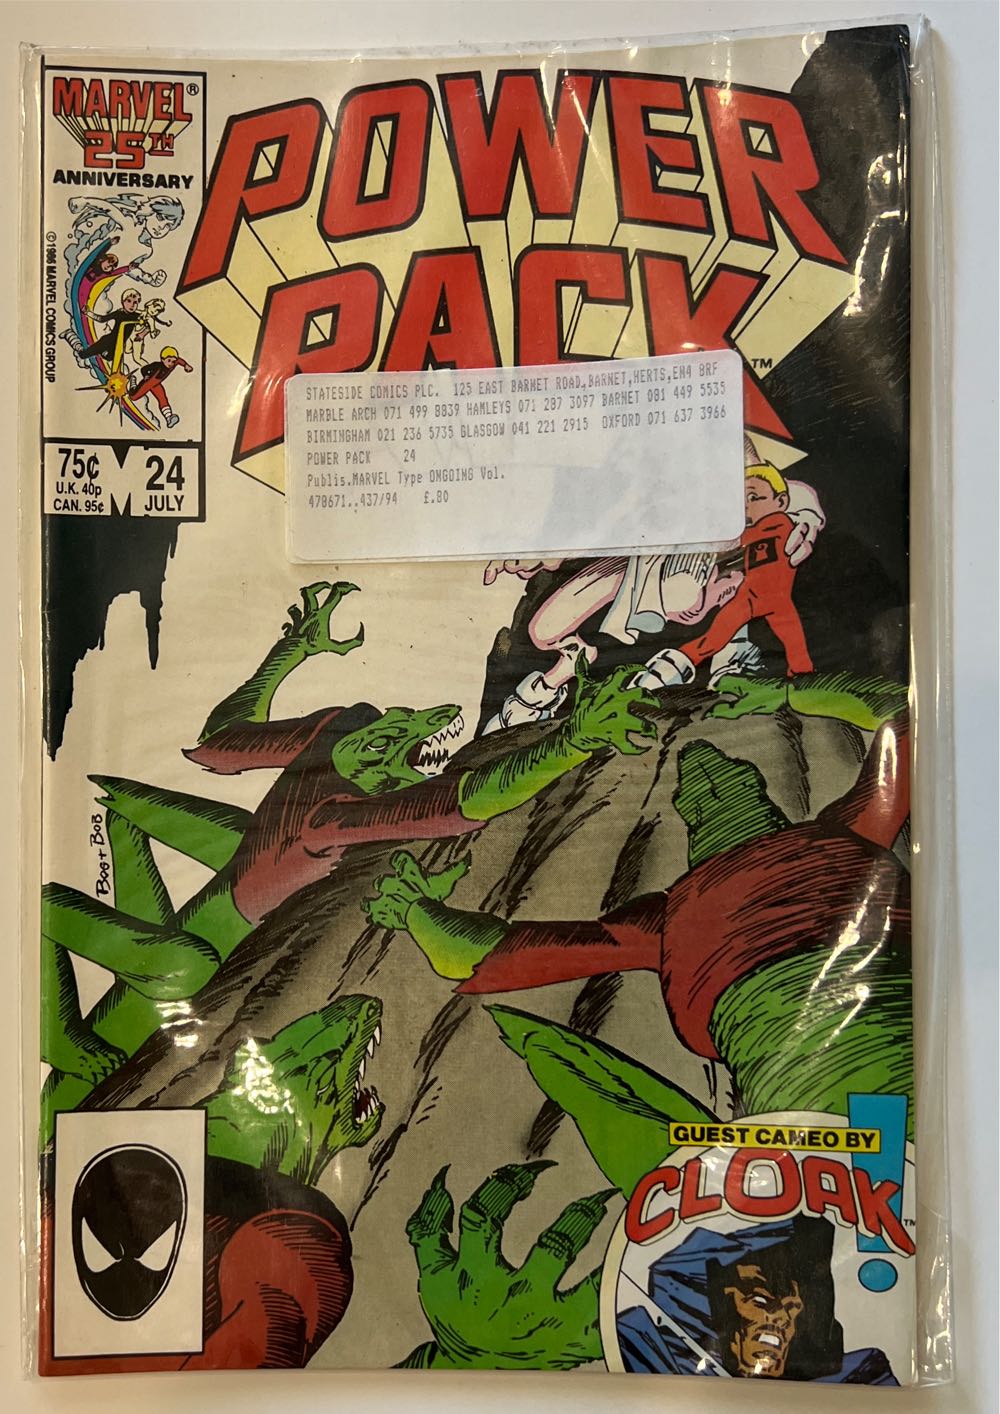 Power Pack (1984) - Marvel (24 - Jul 1986) comic book collectible [Barcode 071486020547] - Main Image 2